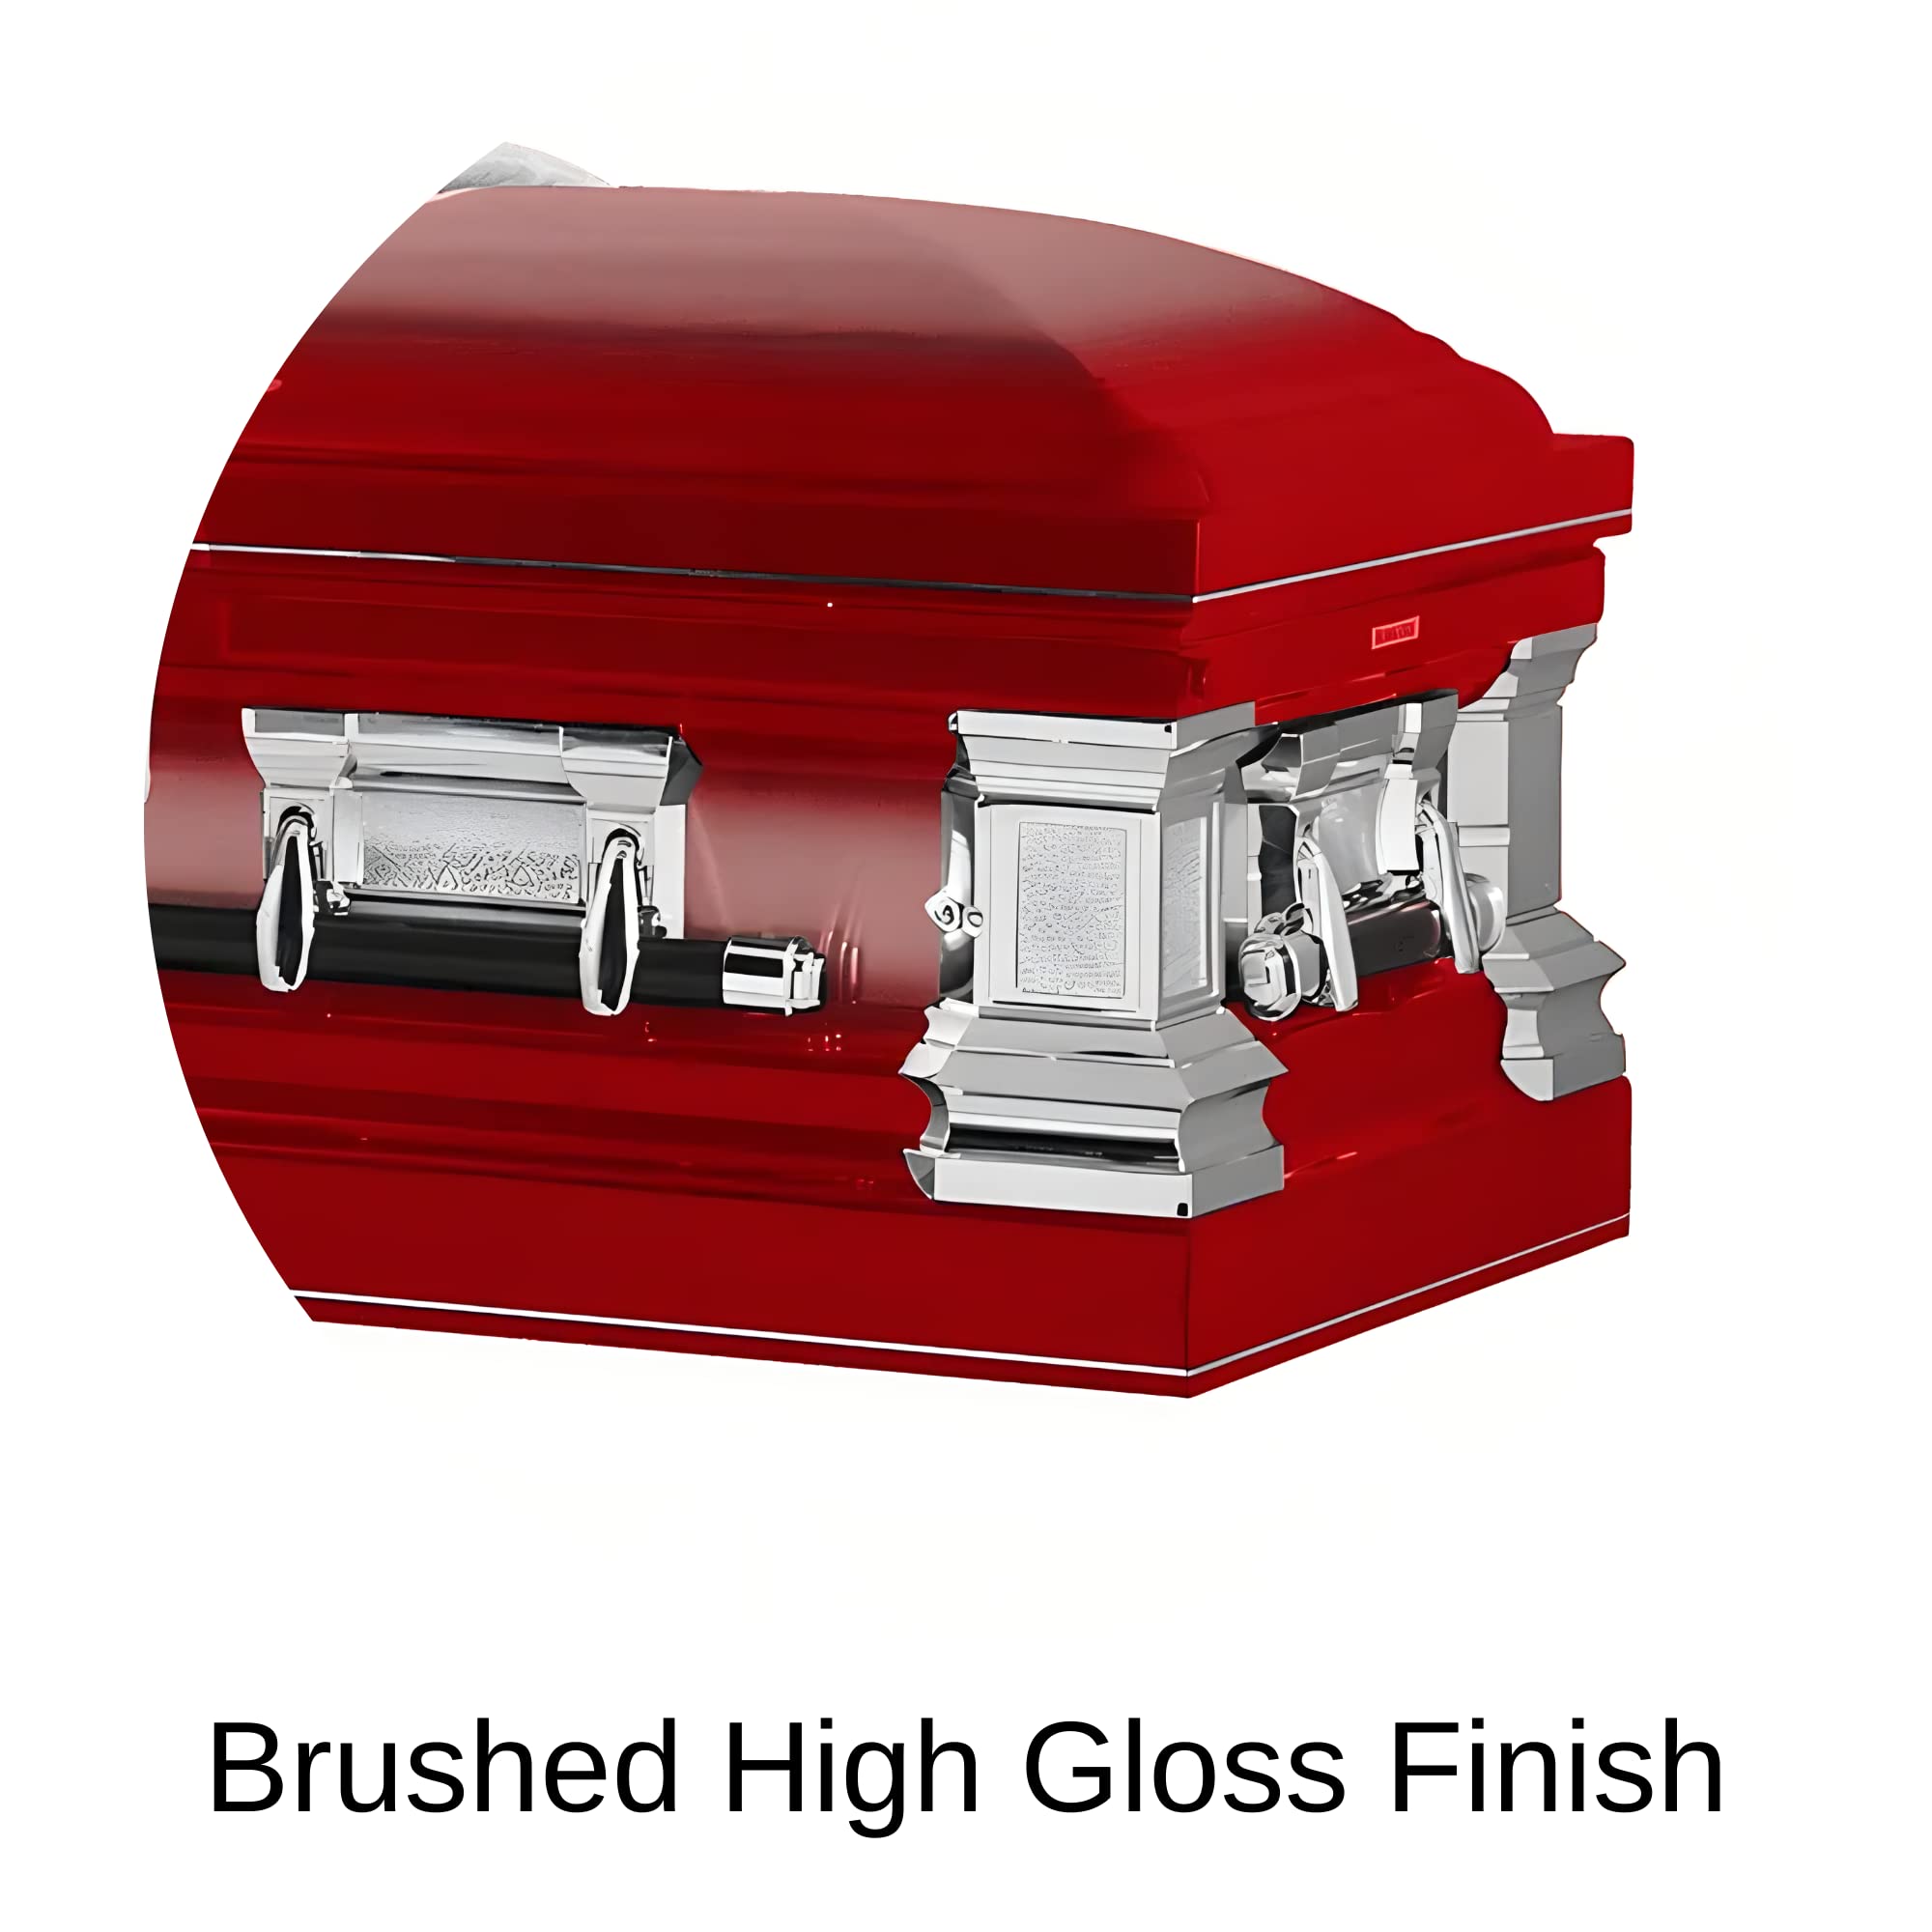 Titan Casket Era Series Stainless Steel Casket (Red) Handcrafted Funeral Casket - Red Finish with White Crepe Interior